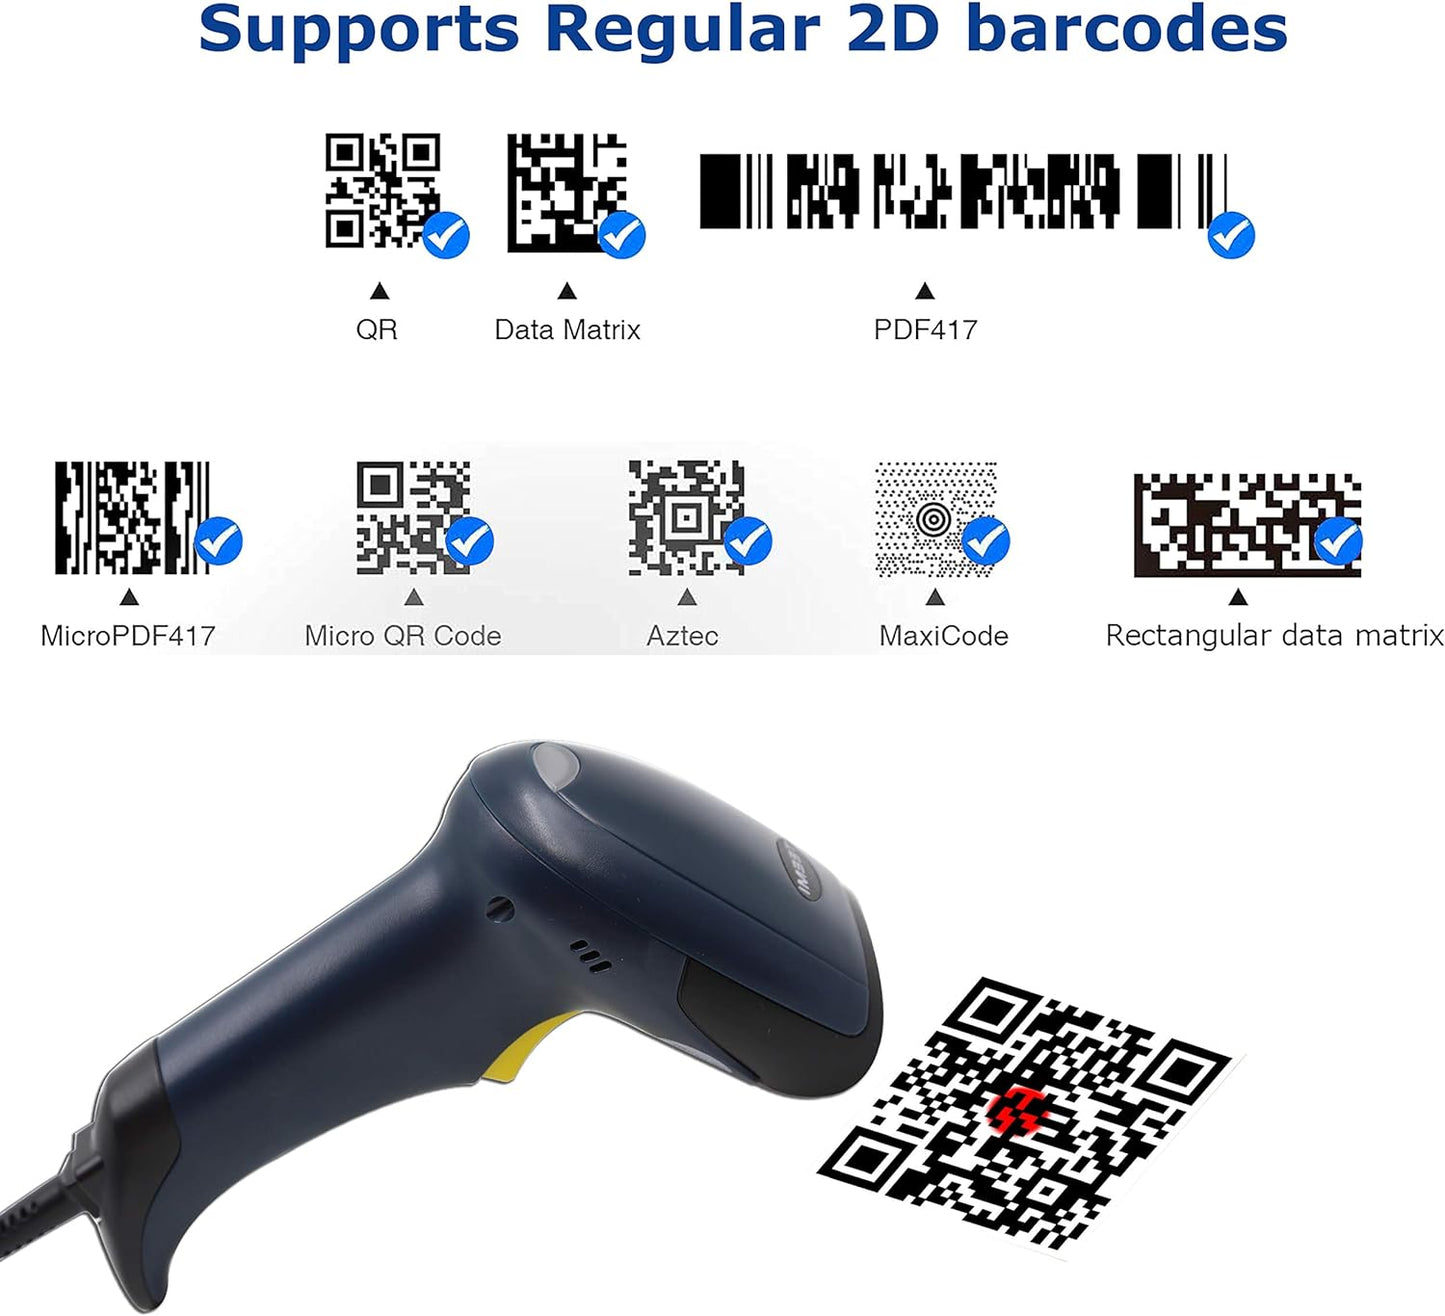 TEEMI T26N-AU 2D QR Barcode Scanner, USB Wired Virtual COM Port Handheld Omnidirectional Scanning, Digital Coupon Screen Code Driver License Scan for Mac OS and Android with OTG Adapter, Window PC, Linux